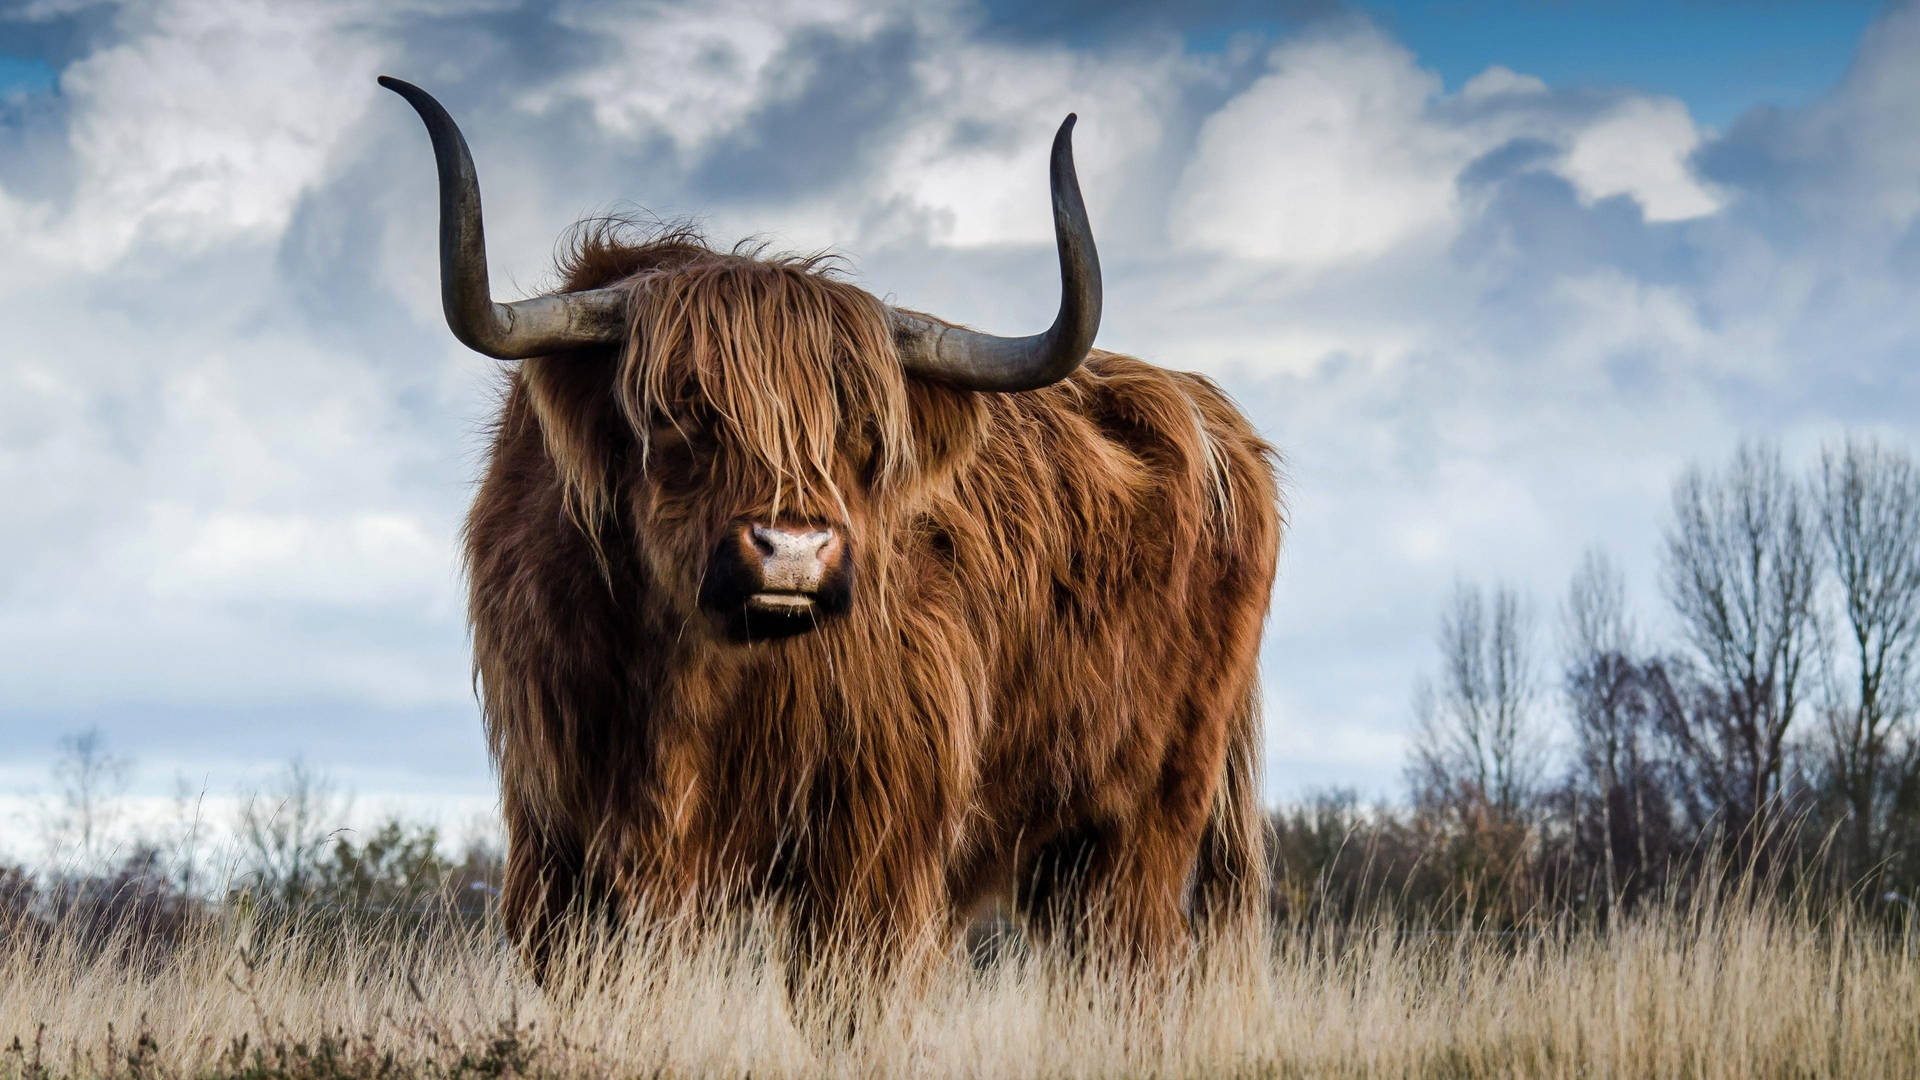 Highland Cow With Cloudy Sky Wallpaper